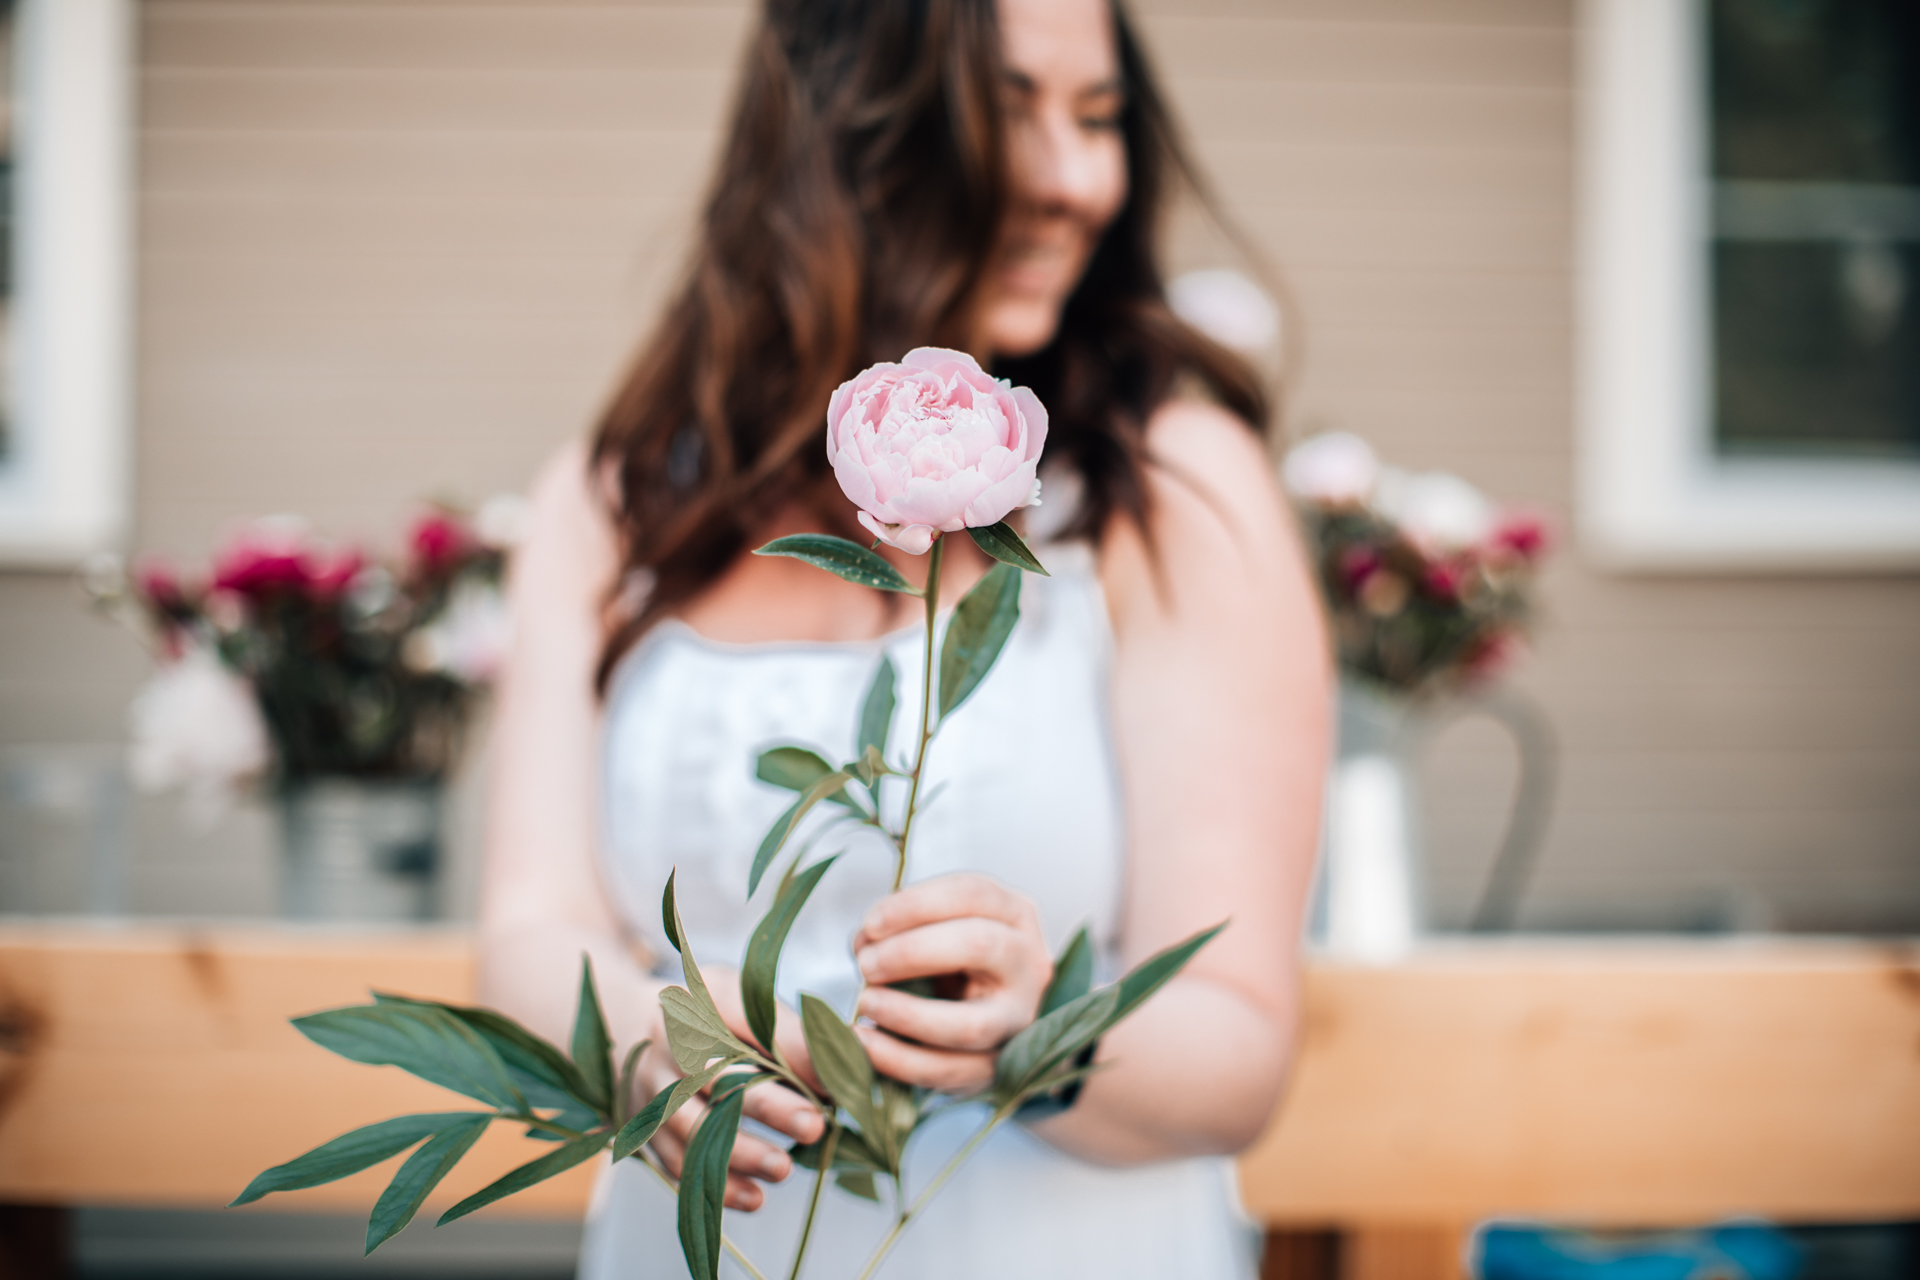 Caring for Peonies by popular New England blogger, Shannon Shipman: image of Shannon Shipman wearing a white dress and holding a light pink peony. 